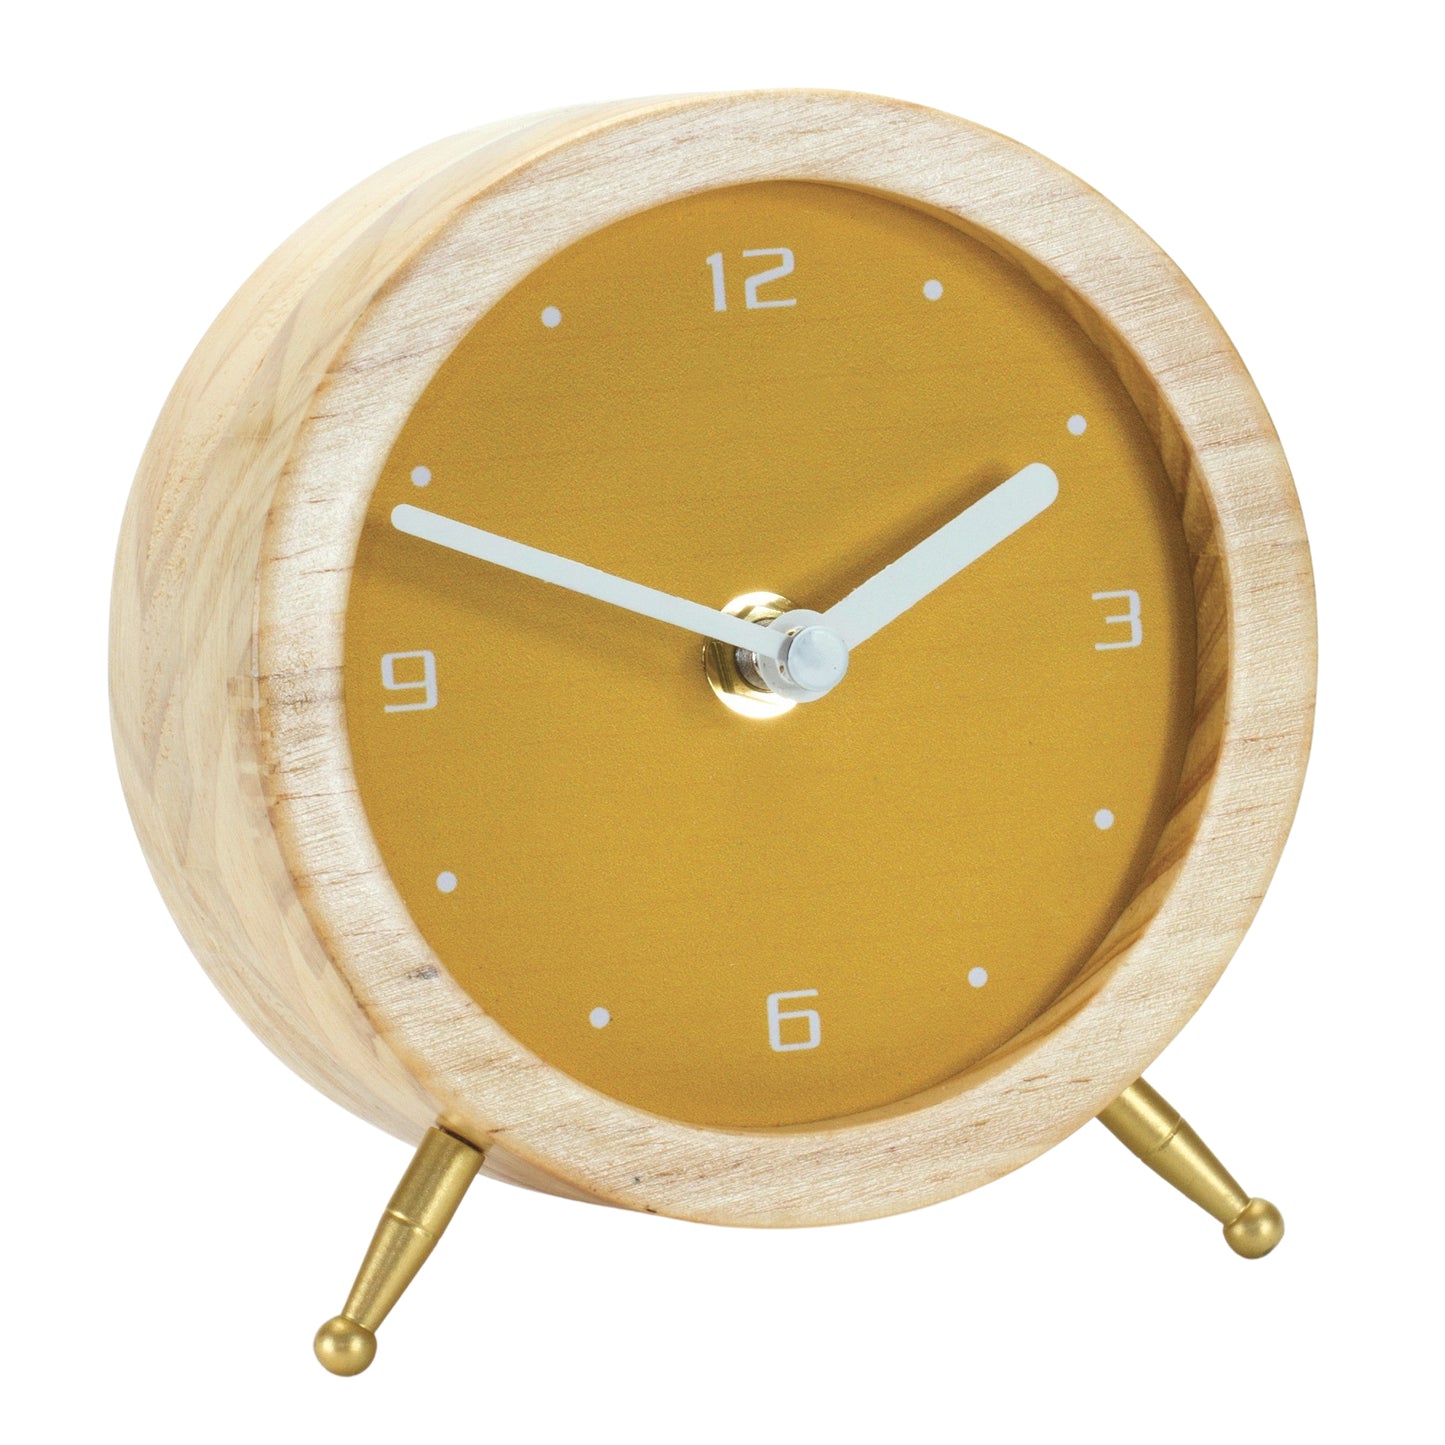 Wooden Desk Clock with Mustard Yellow Face 4.75"H